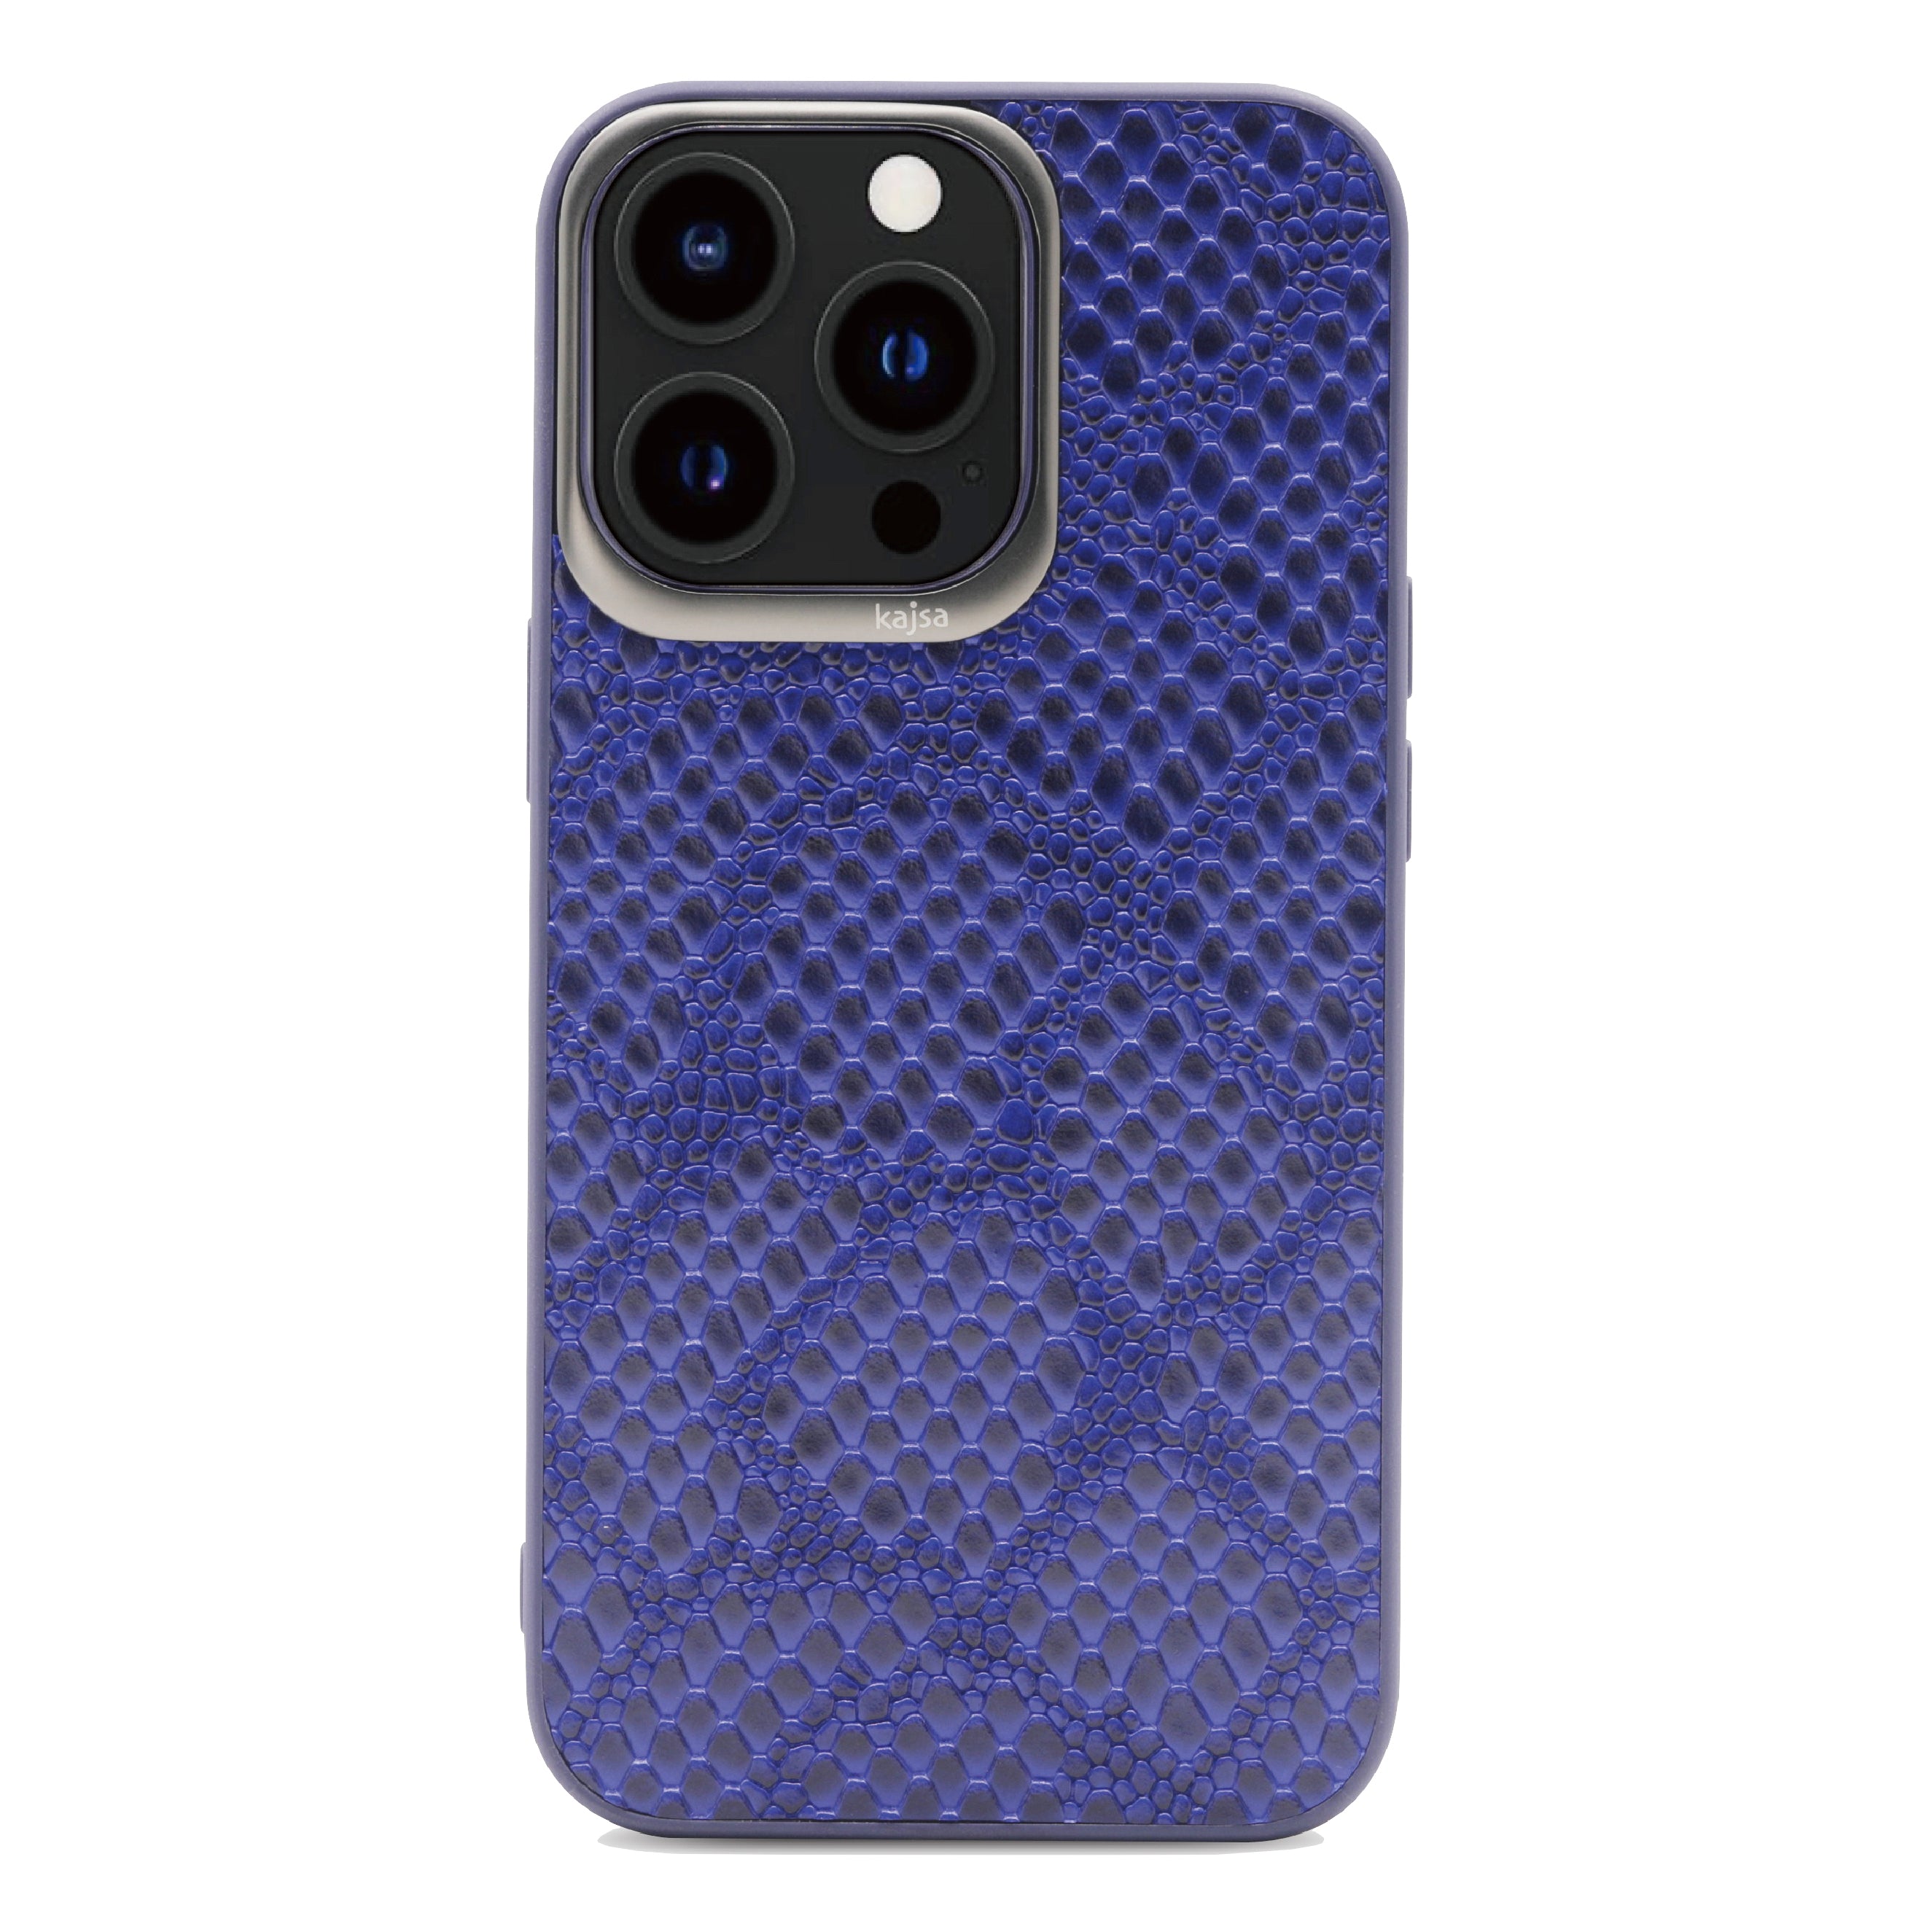 Glamorous Collection - Complex Lizard Back Case for iPhone 13-Phone Case- phone case - phone cases- phone cover- iphone cover- iphone case- iphone cases- leather case- leather cases- DIYCASE - custom case - leather cover - hand strap case - croco pattern case - snake pattern case - carbon fiber phone case - phone case brand - unique phone case - high quality - phone case brand - protective case - buy phone case hong kong - online buy phone case - iphone‎手機殼 - 客製化手機殼 - samsung ‎手機殼 - 香港手機殼 - 買電話殼